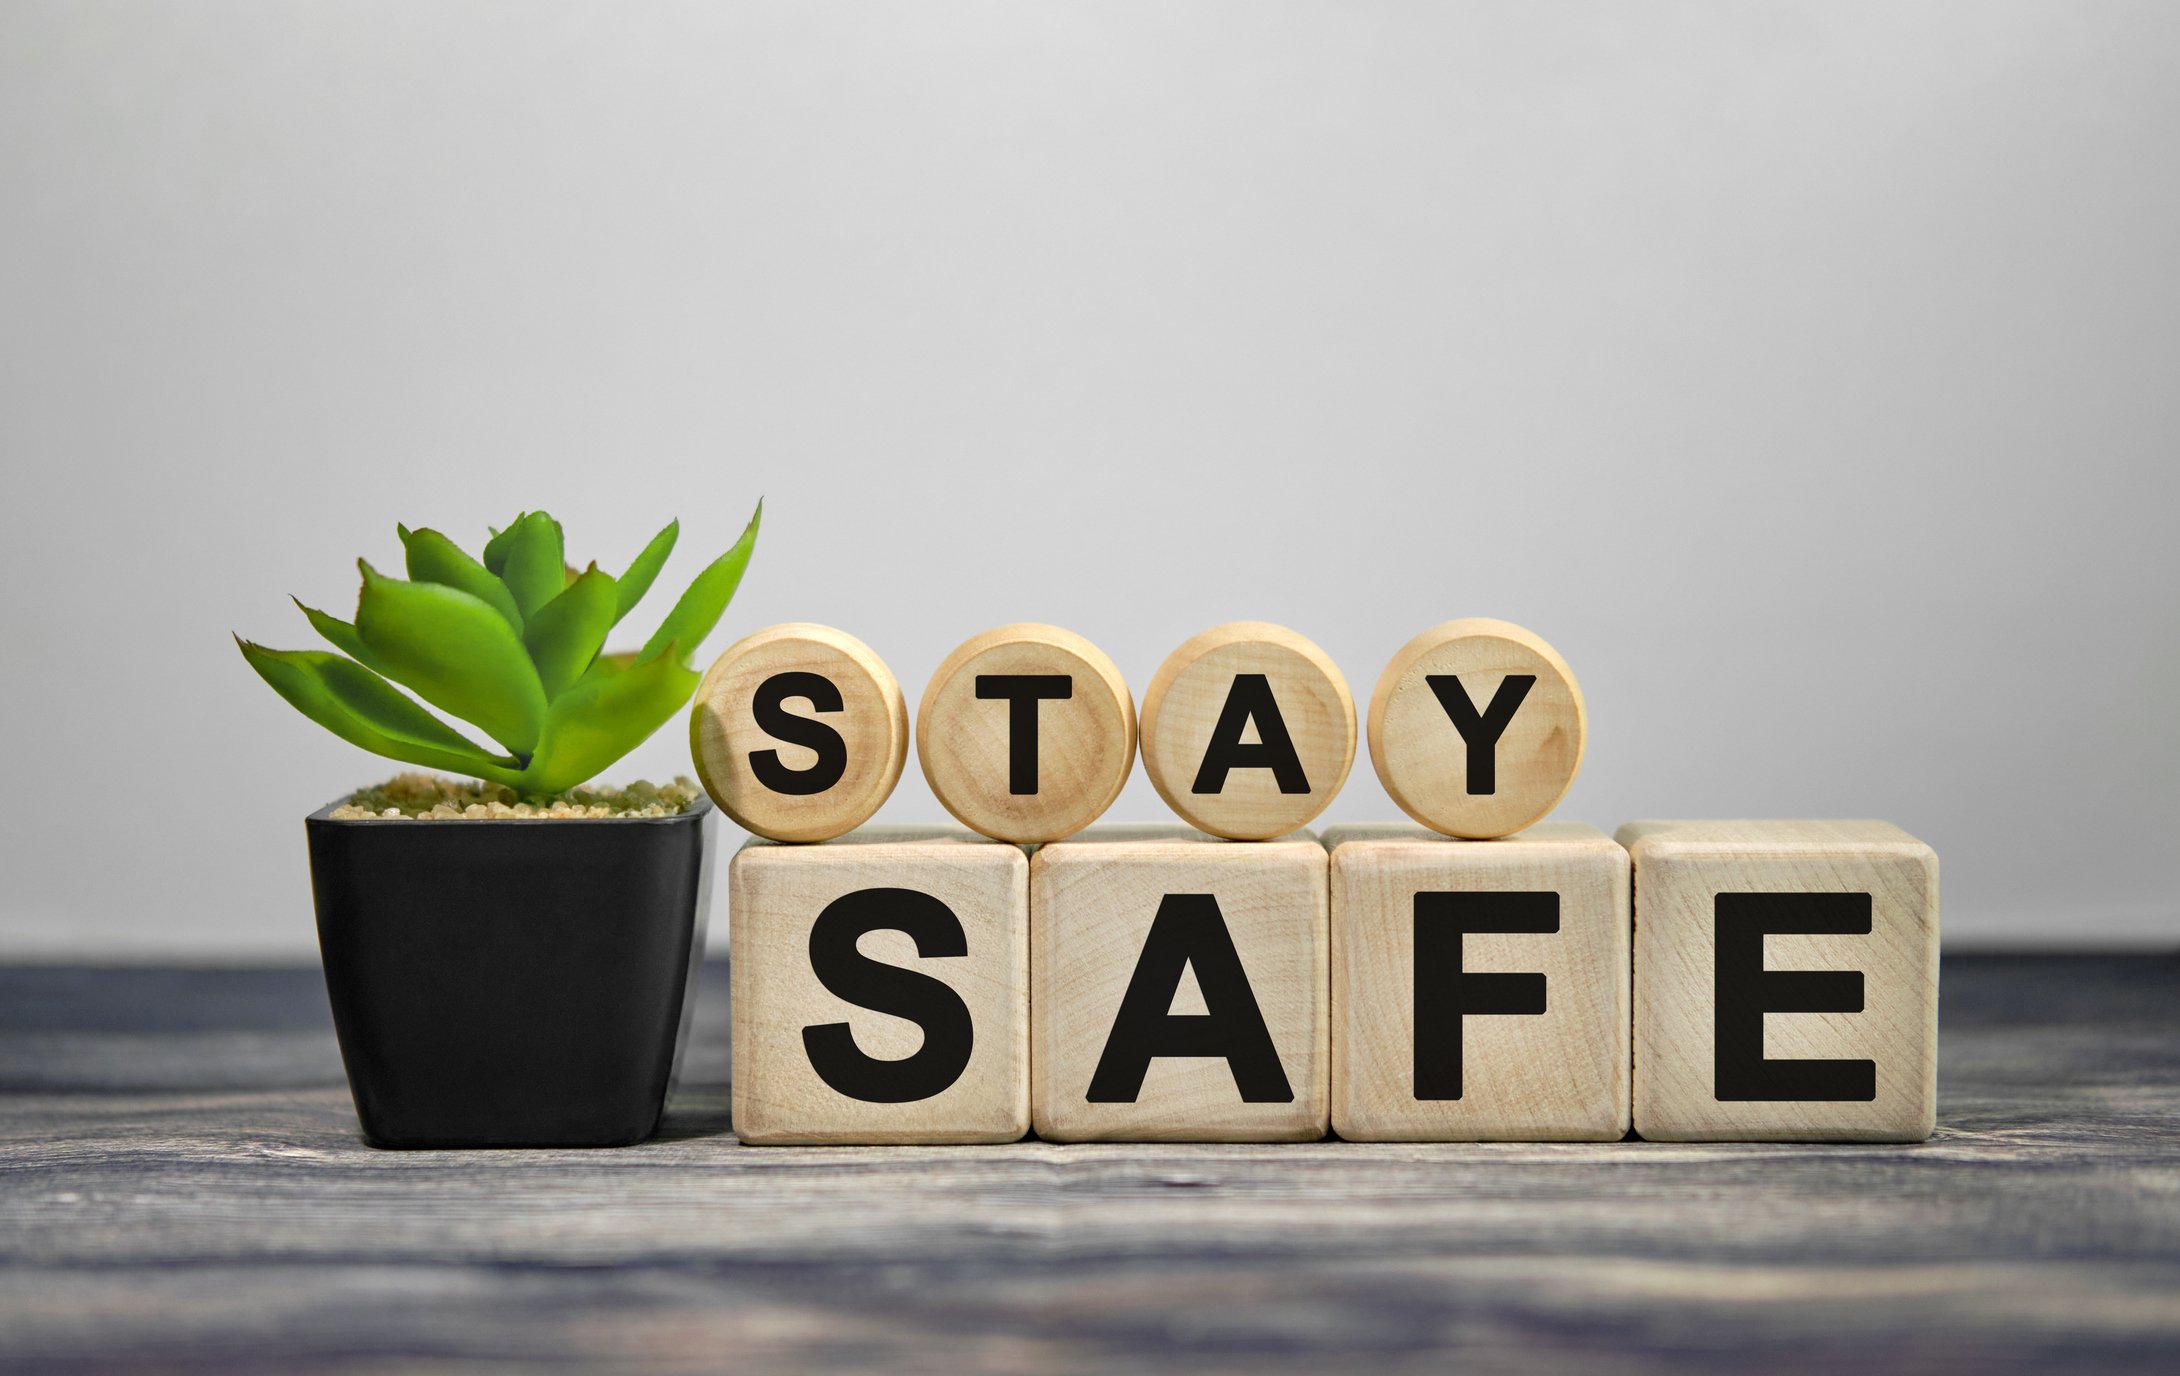 3 Ways to Stay Safe As We Get Back to Normal